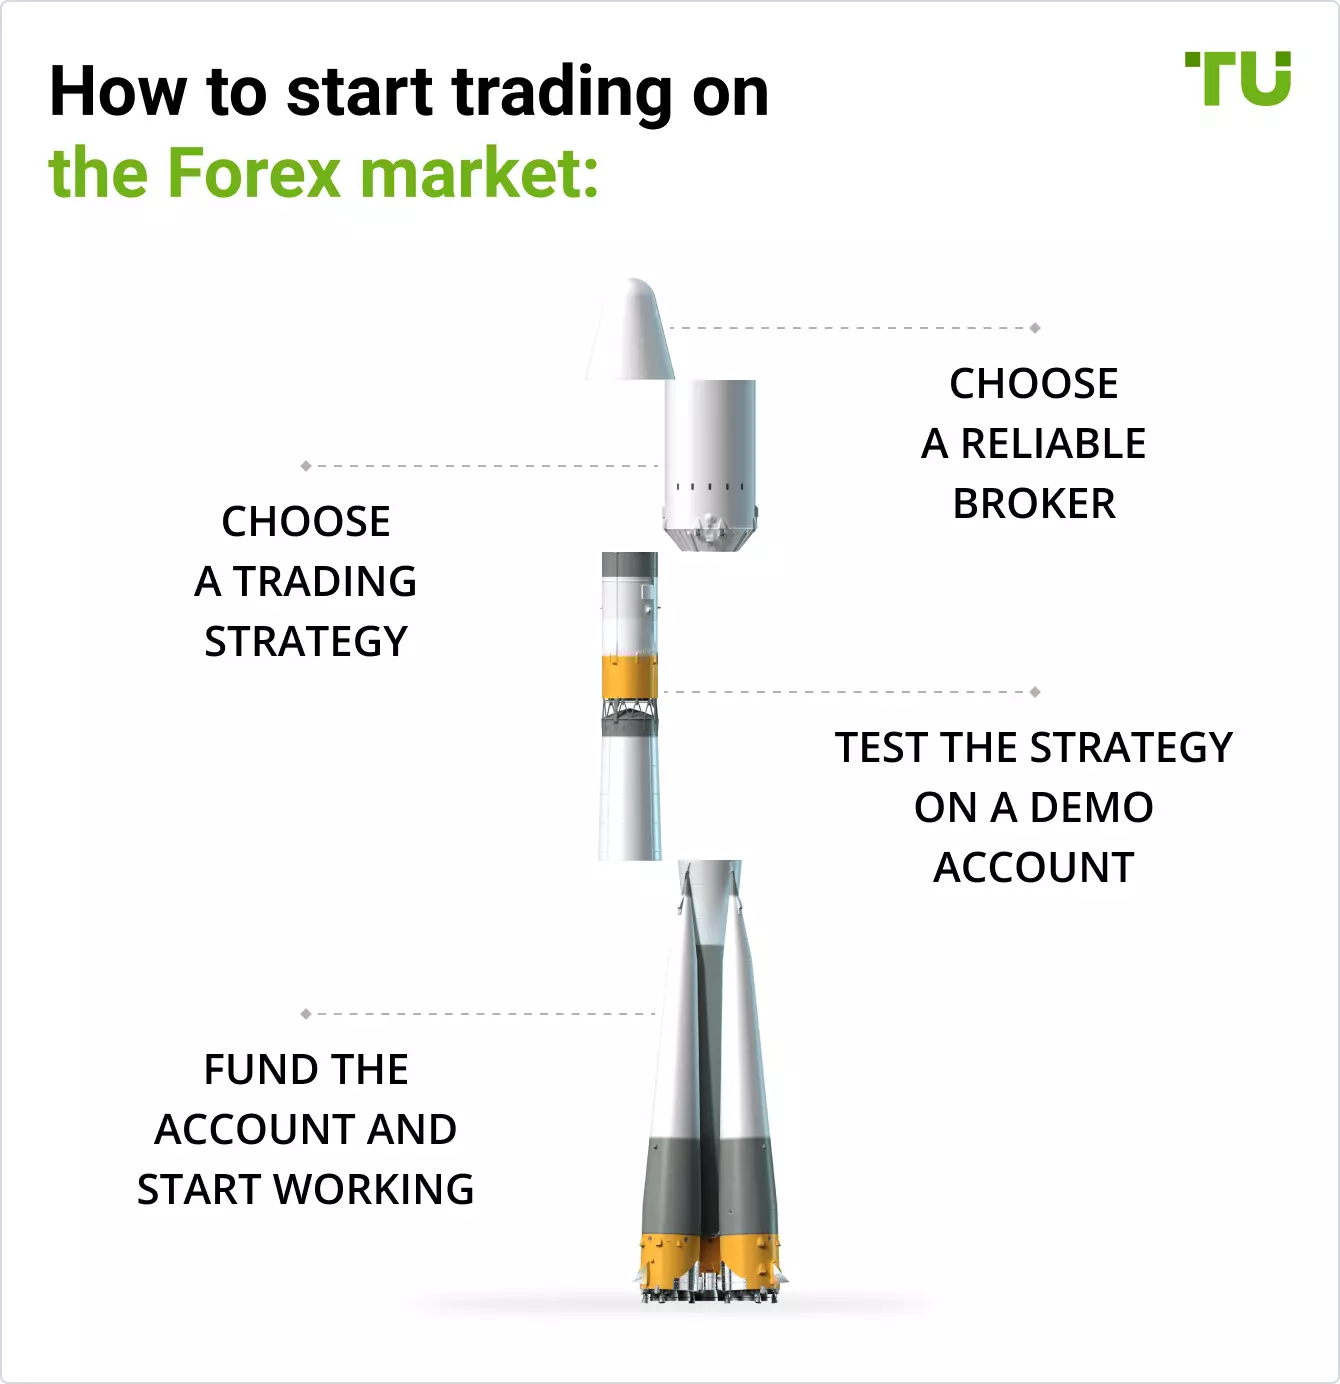 How to start trading on the Forex market